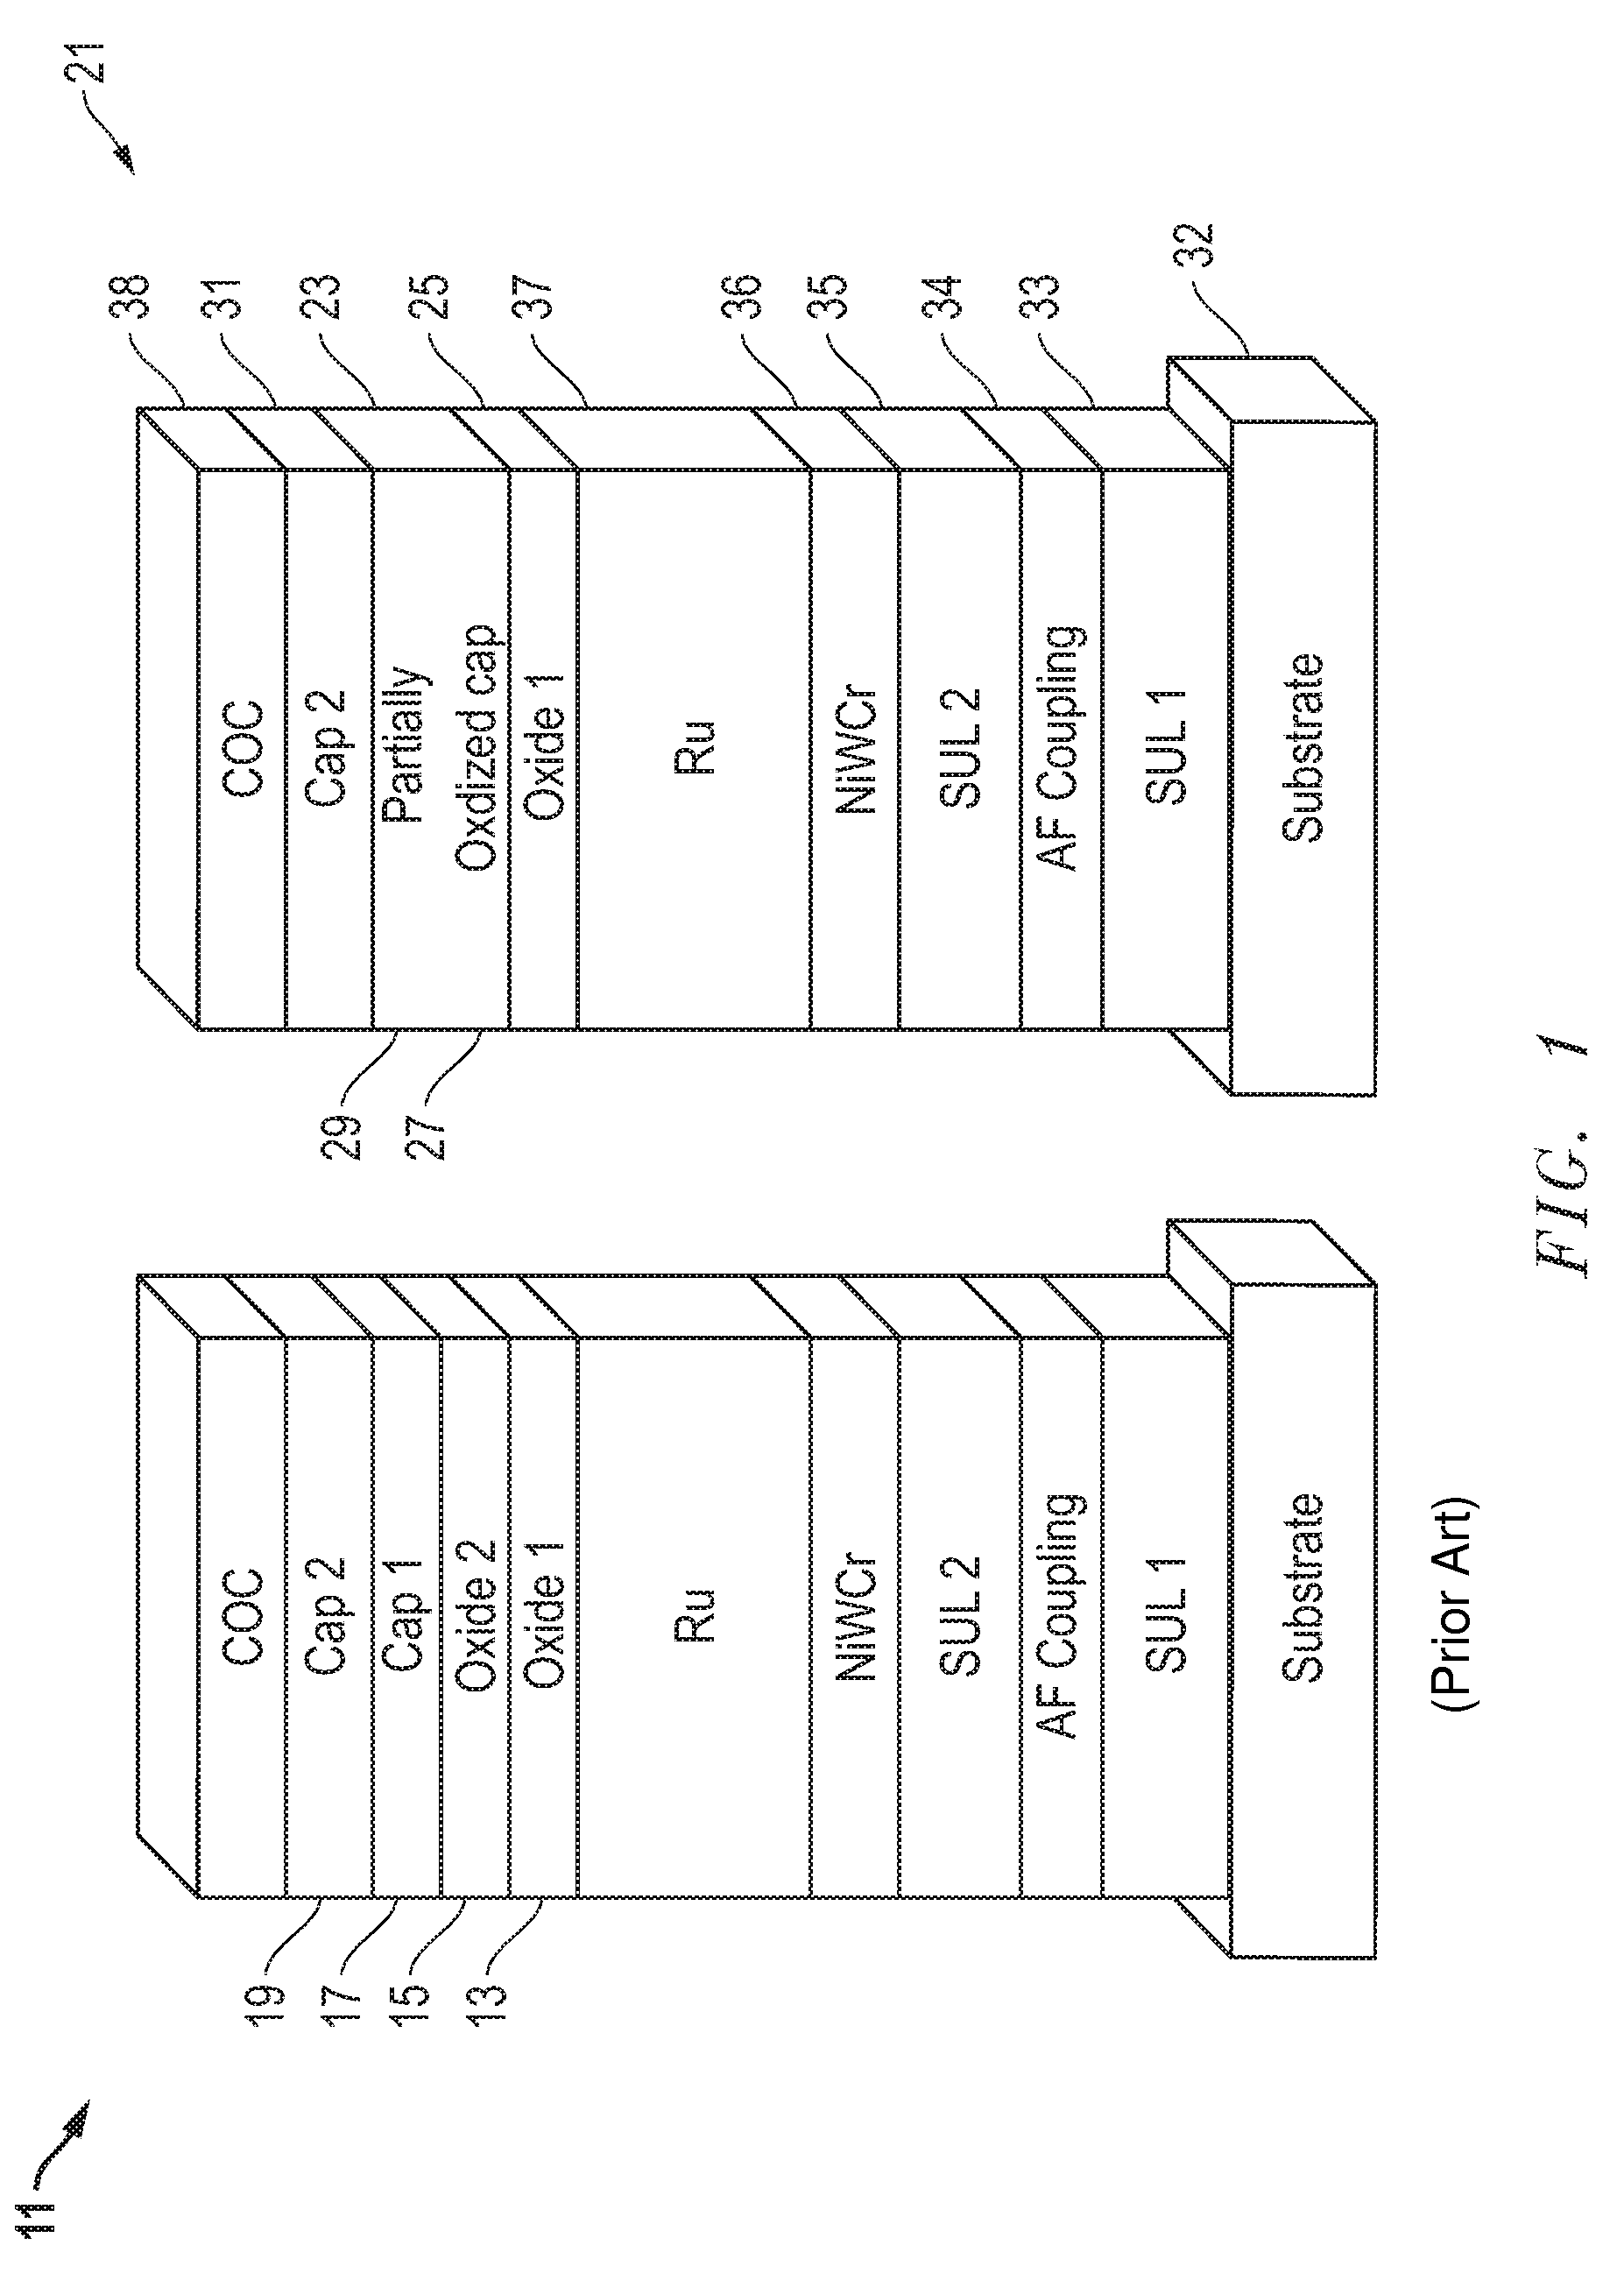 Partially-oxidized cap layer for hard disk drive magnetic media